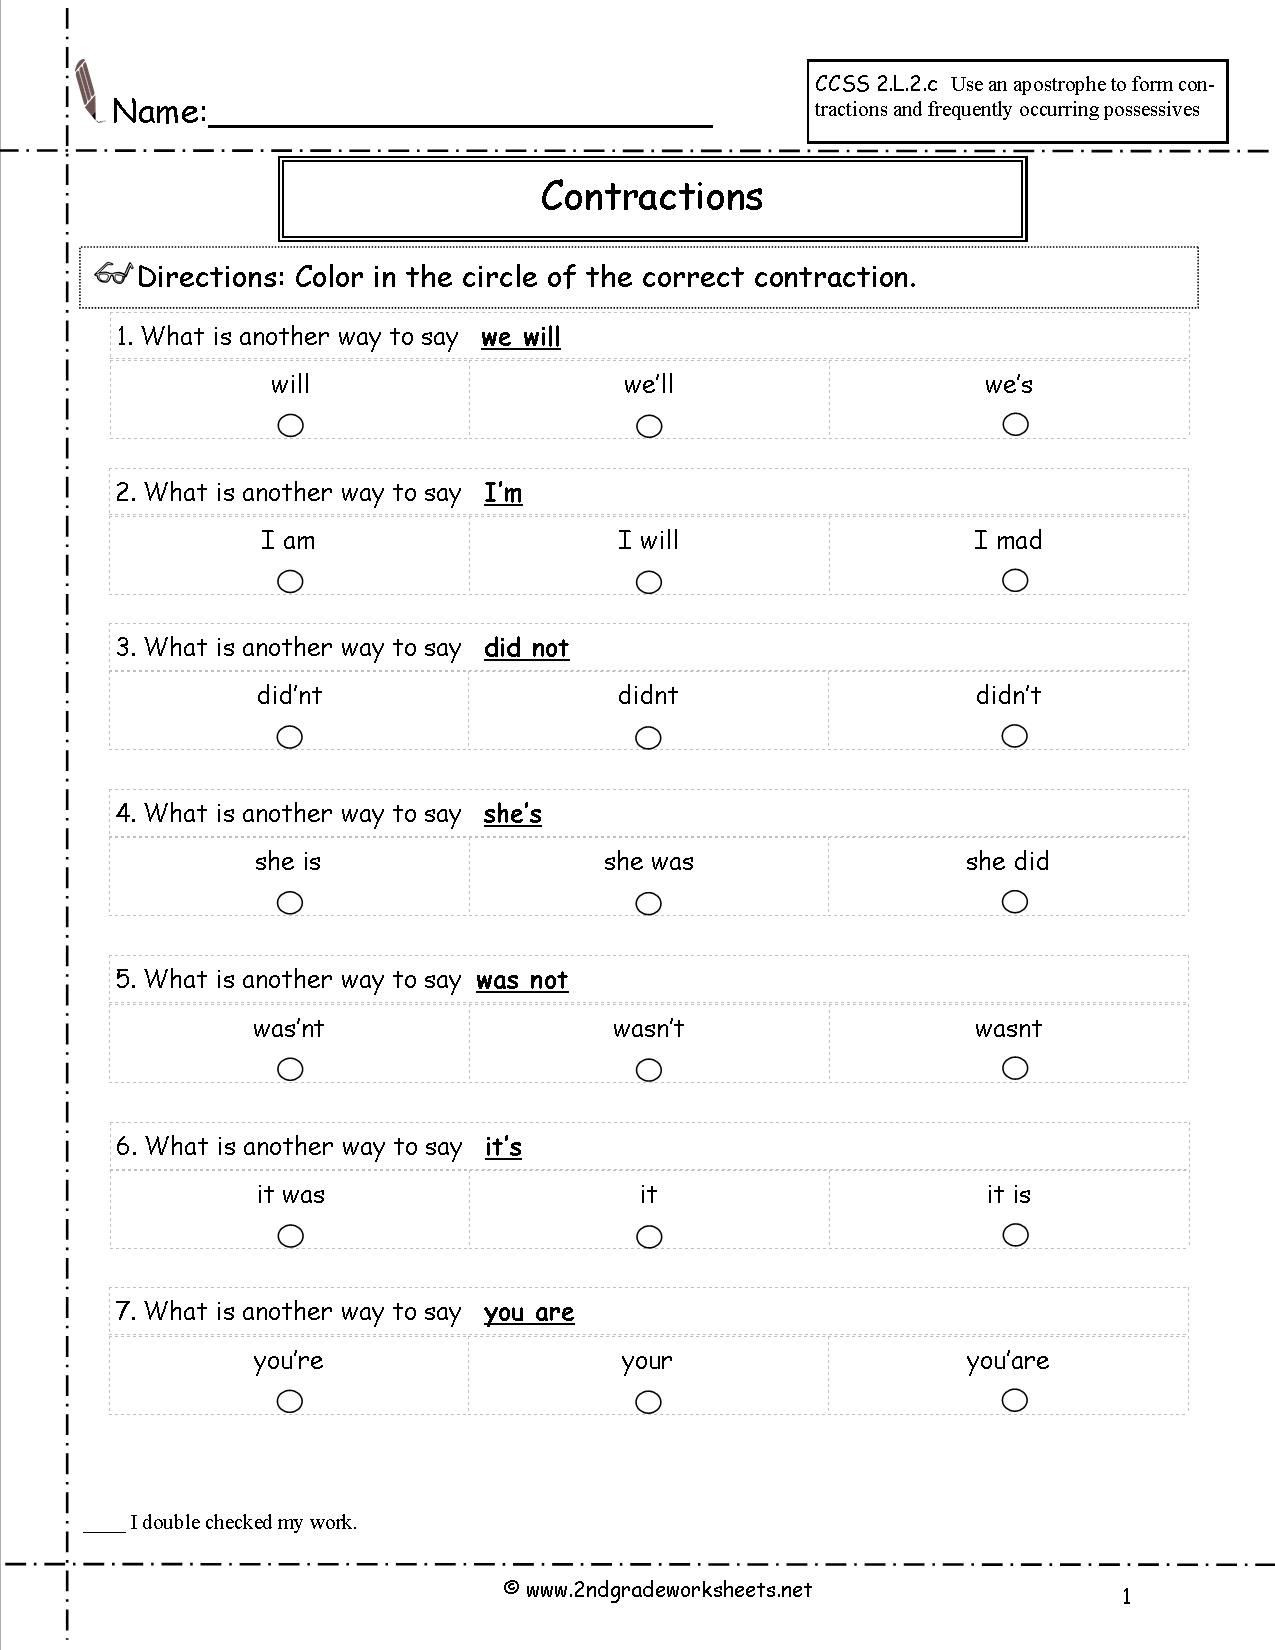 Contractions Worksheet 3rd Grade Pin by Raffy Vallo On Contractions